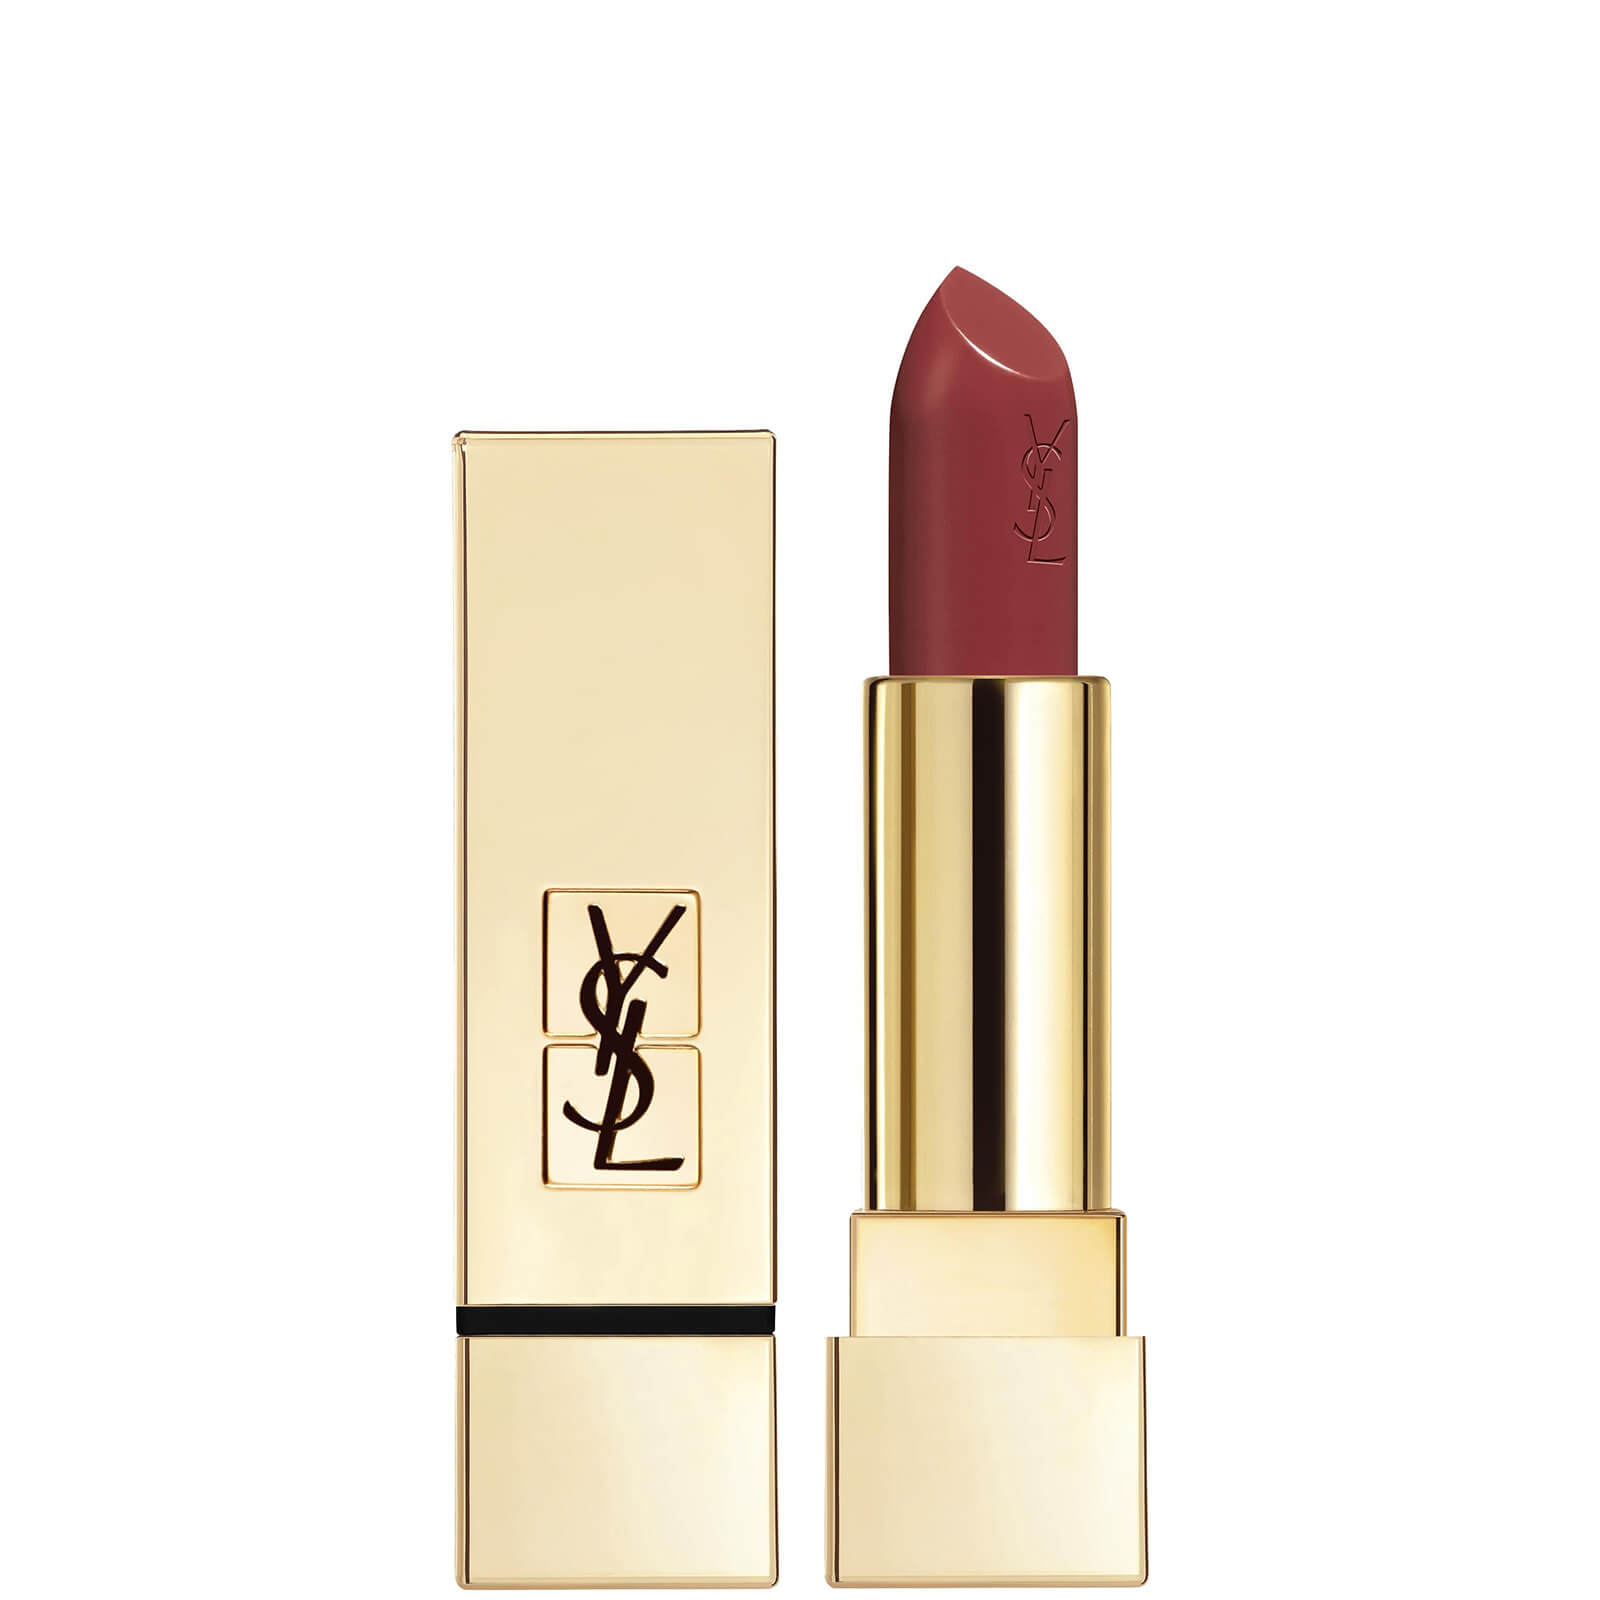 Ysl Yves Saint Laurent Rouge Pur Couture Lipstick 3.8g (Various Shades) - 157 Nu Inattendu